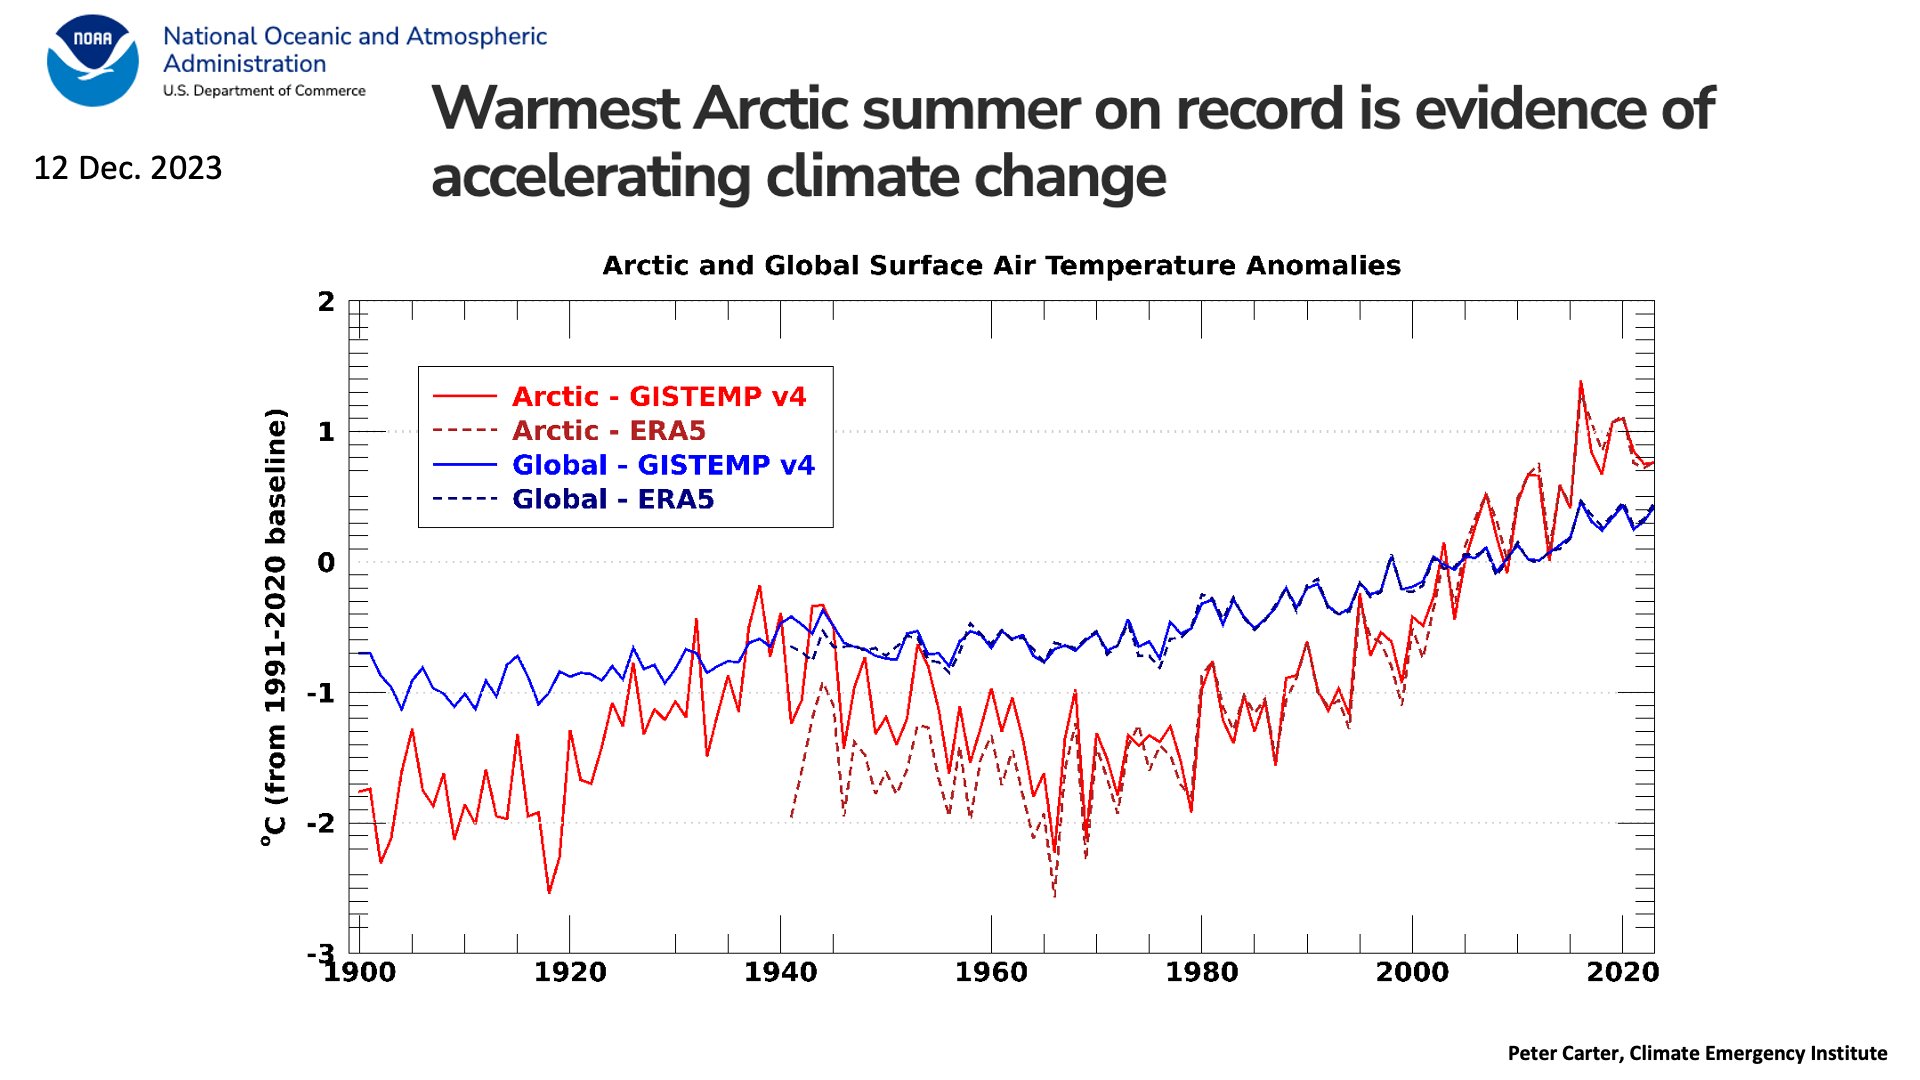 Warmest Arctic summer on record is evidence of accelerating